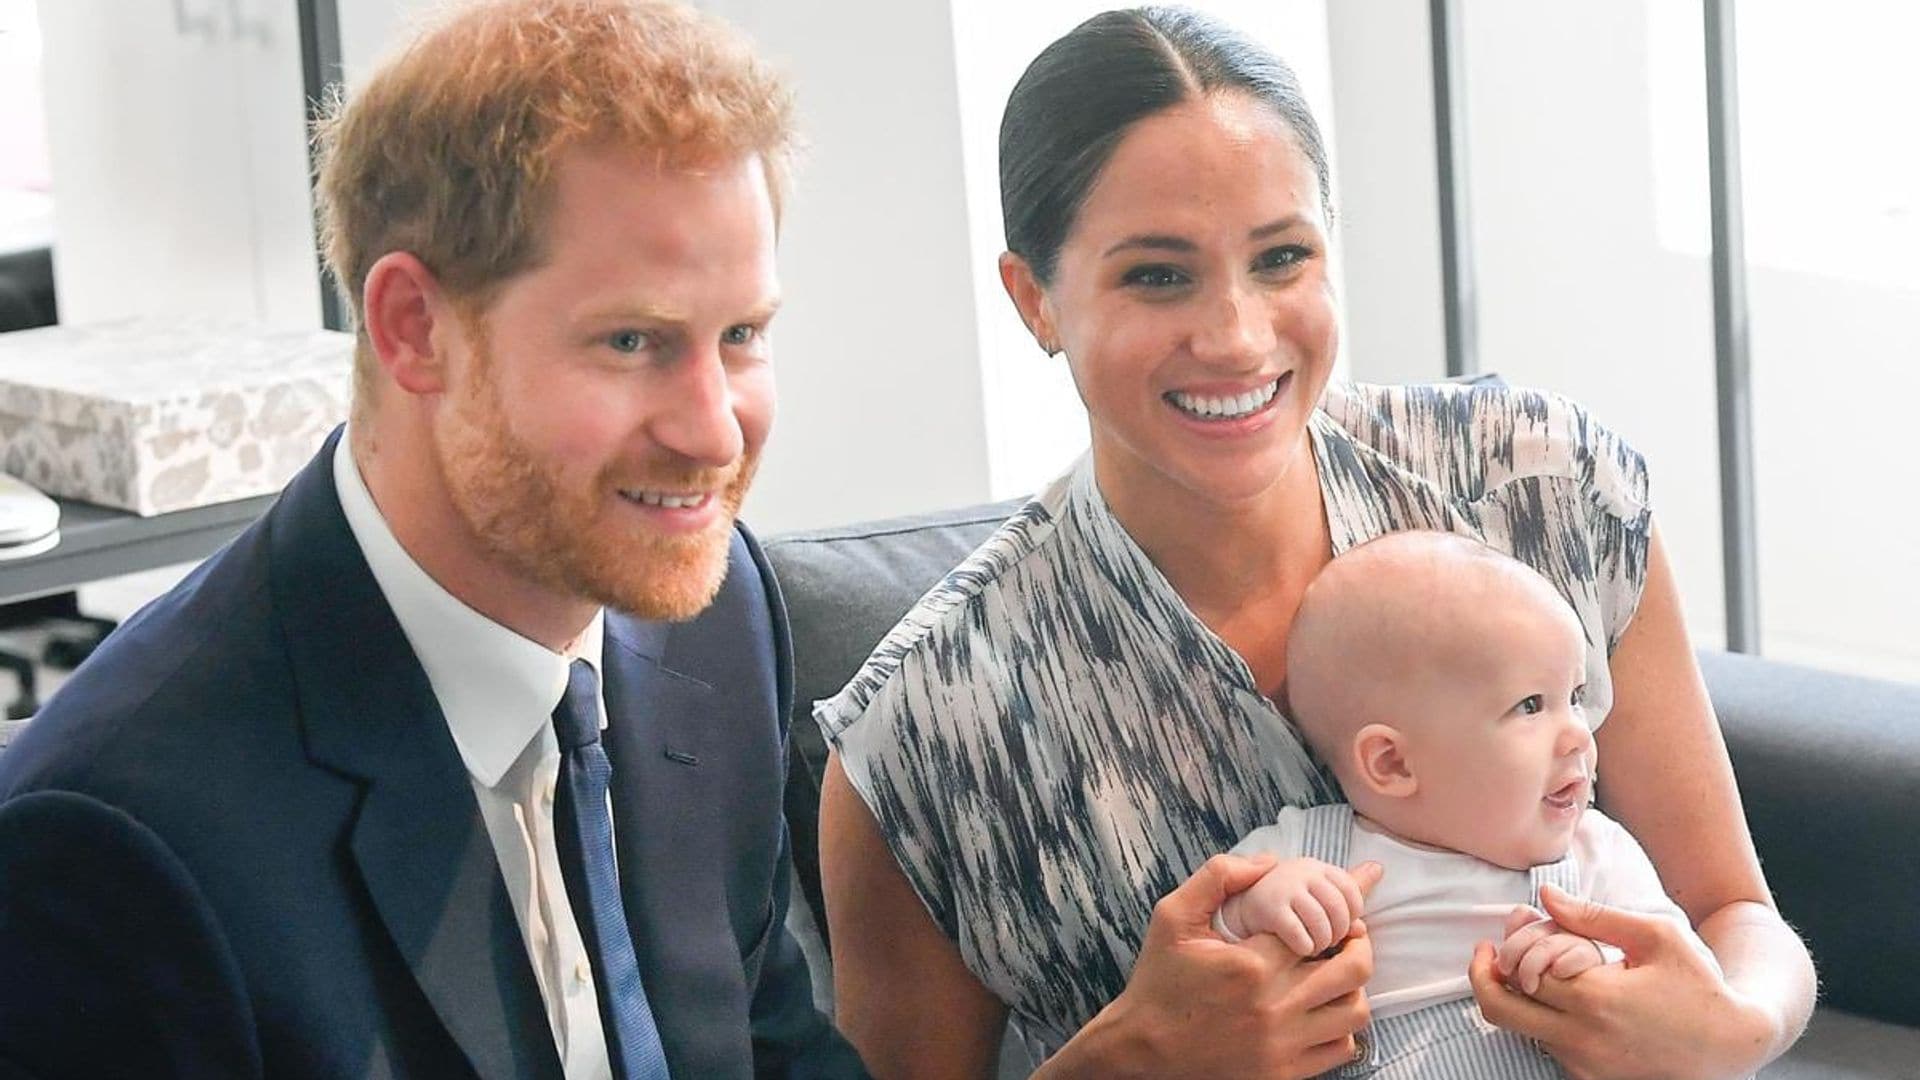 Meghan Markle and Prince Harry’s son Archie celebrates his 5th birthday